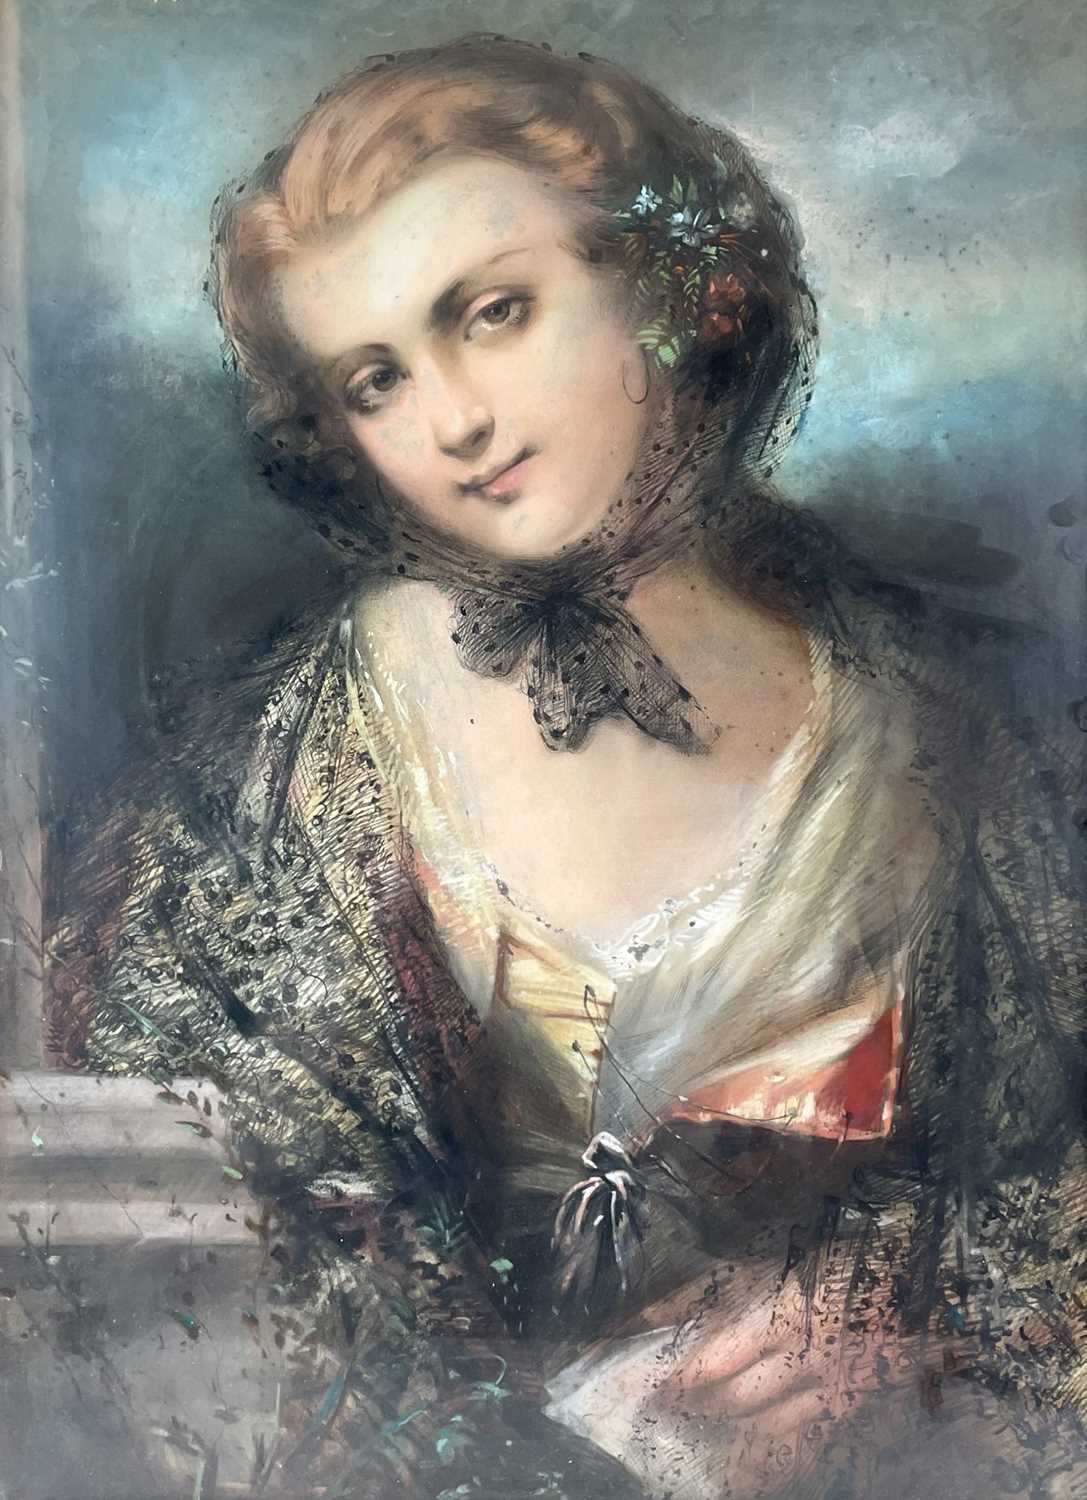 A 19th Century portrait overpainted using pastel